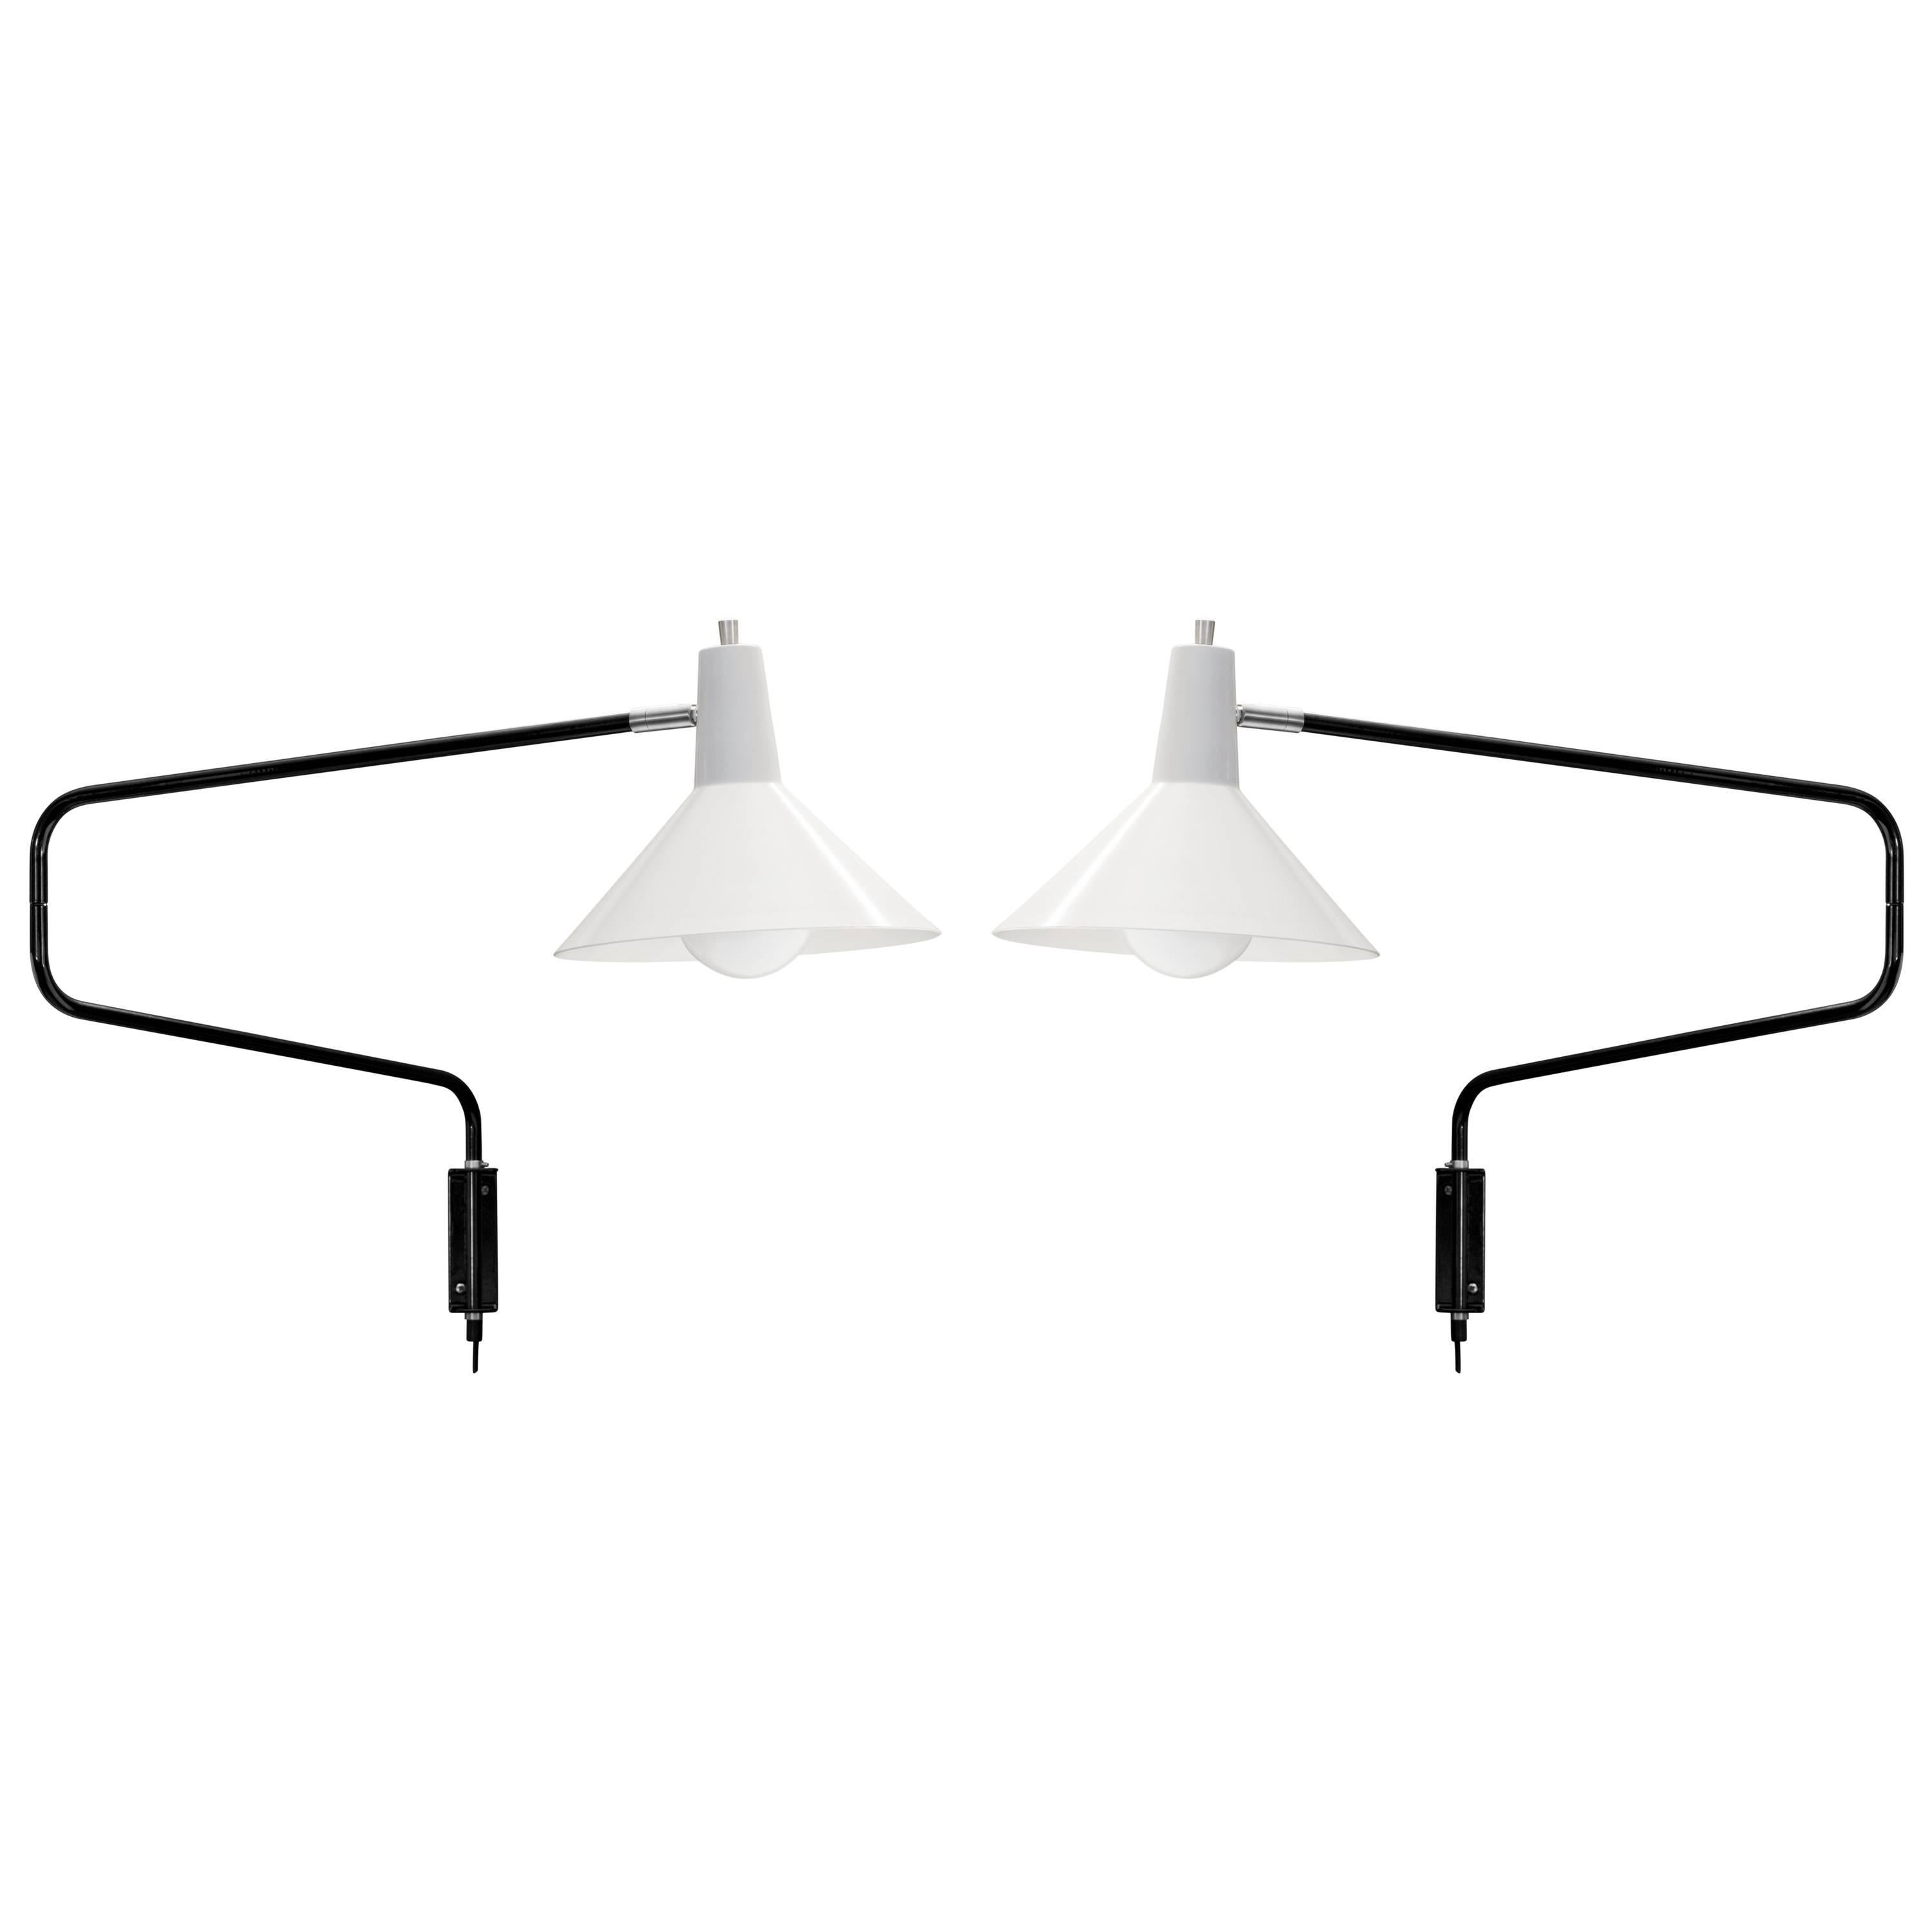 J.J.M. Hoogervorst white paperclip wall lights for Anvia. Hoogervorst's most popular 1950s design, this lamp remains a highly sought after icon of Dutch modernism. The 'elbow' arm when folded measures 27.5 in. wide, but can be extended to a maximum